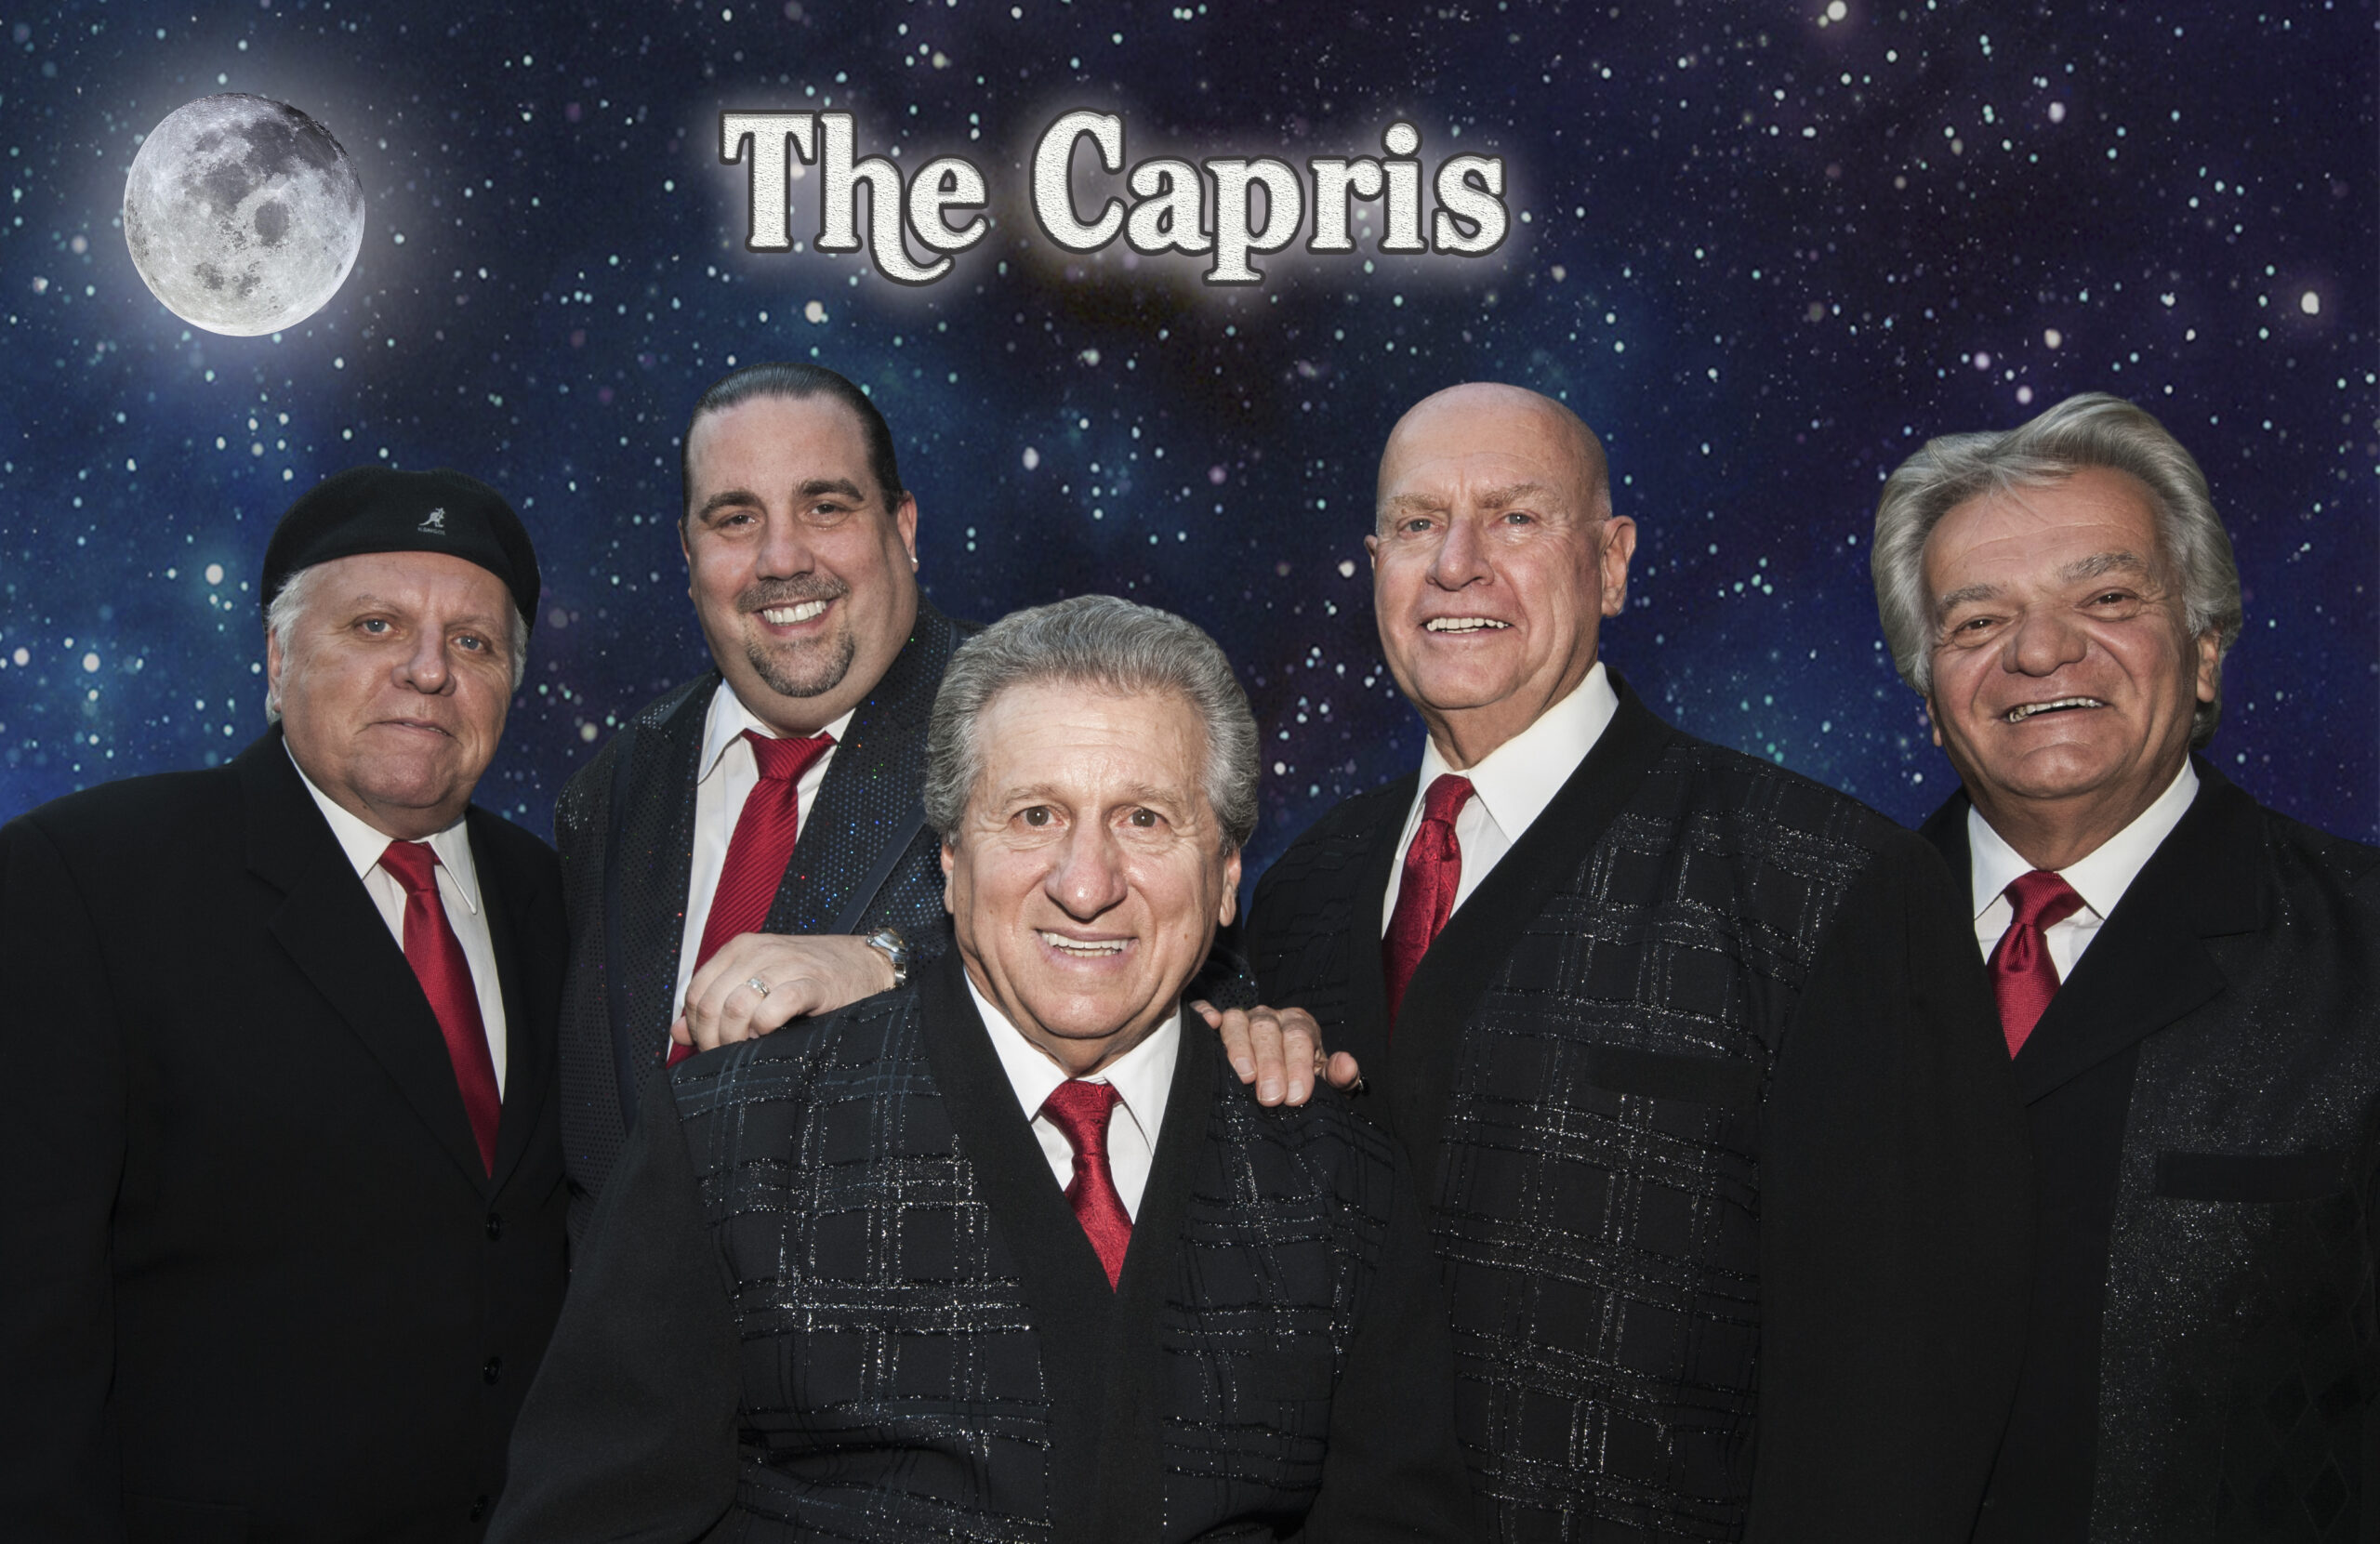 The Capris come to The Keswick Theater